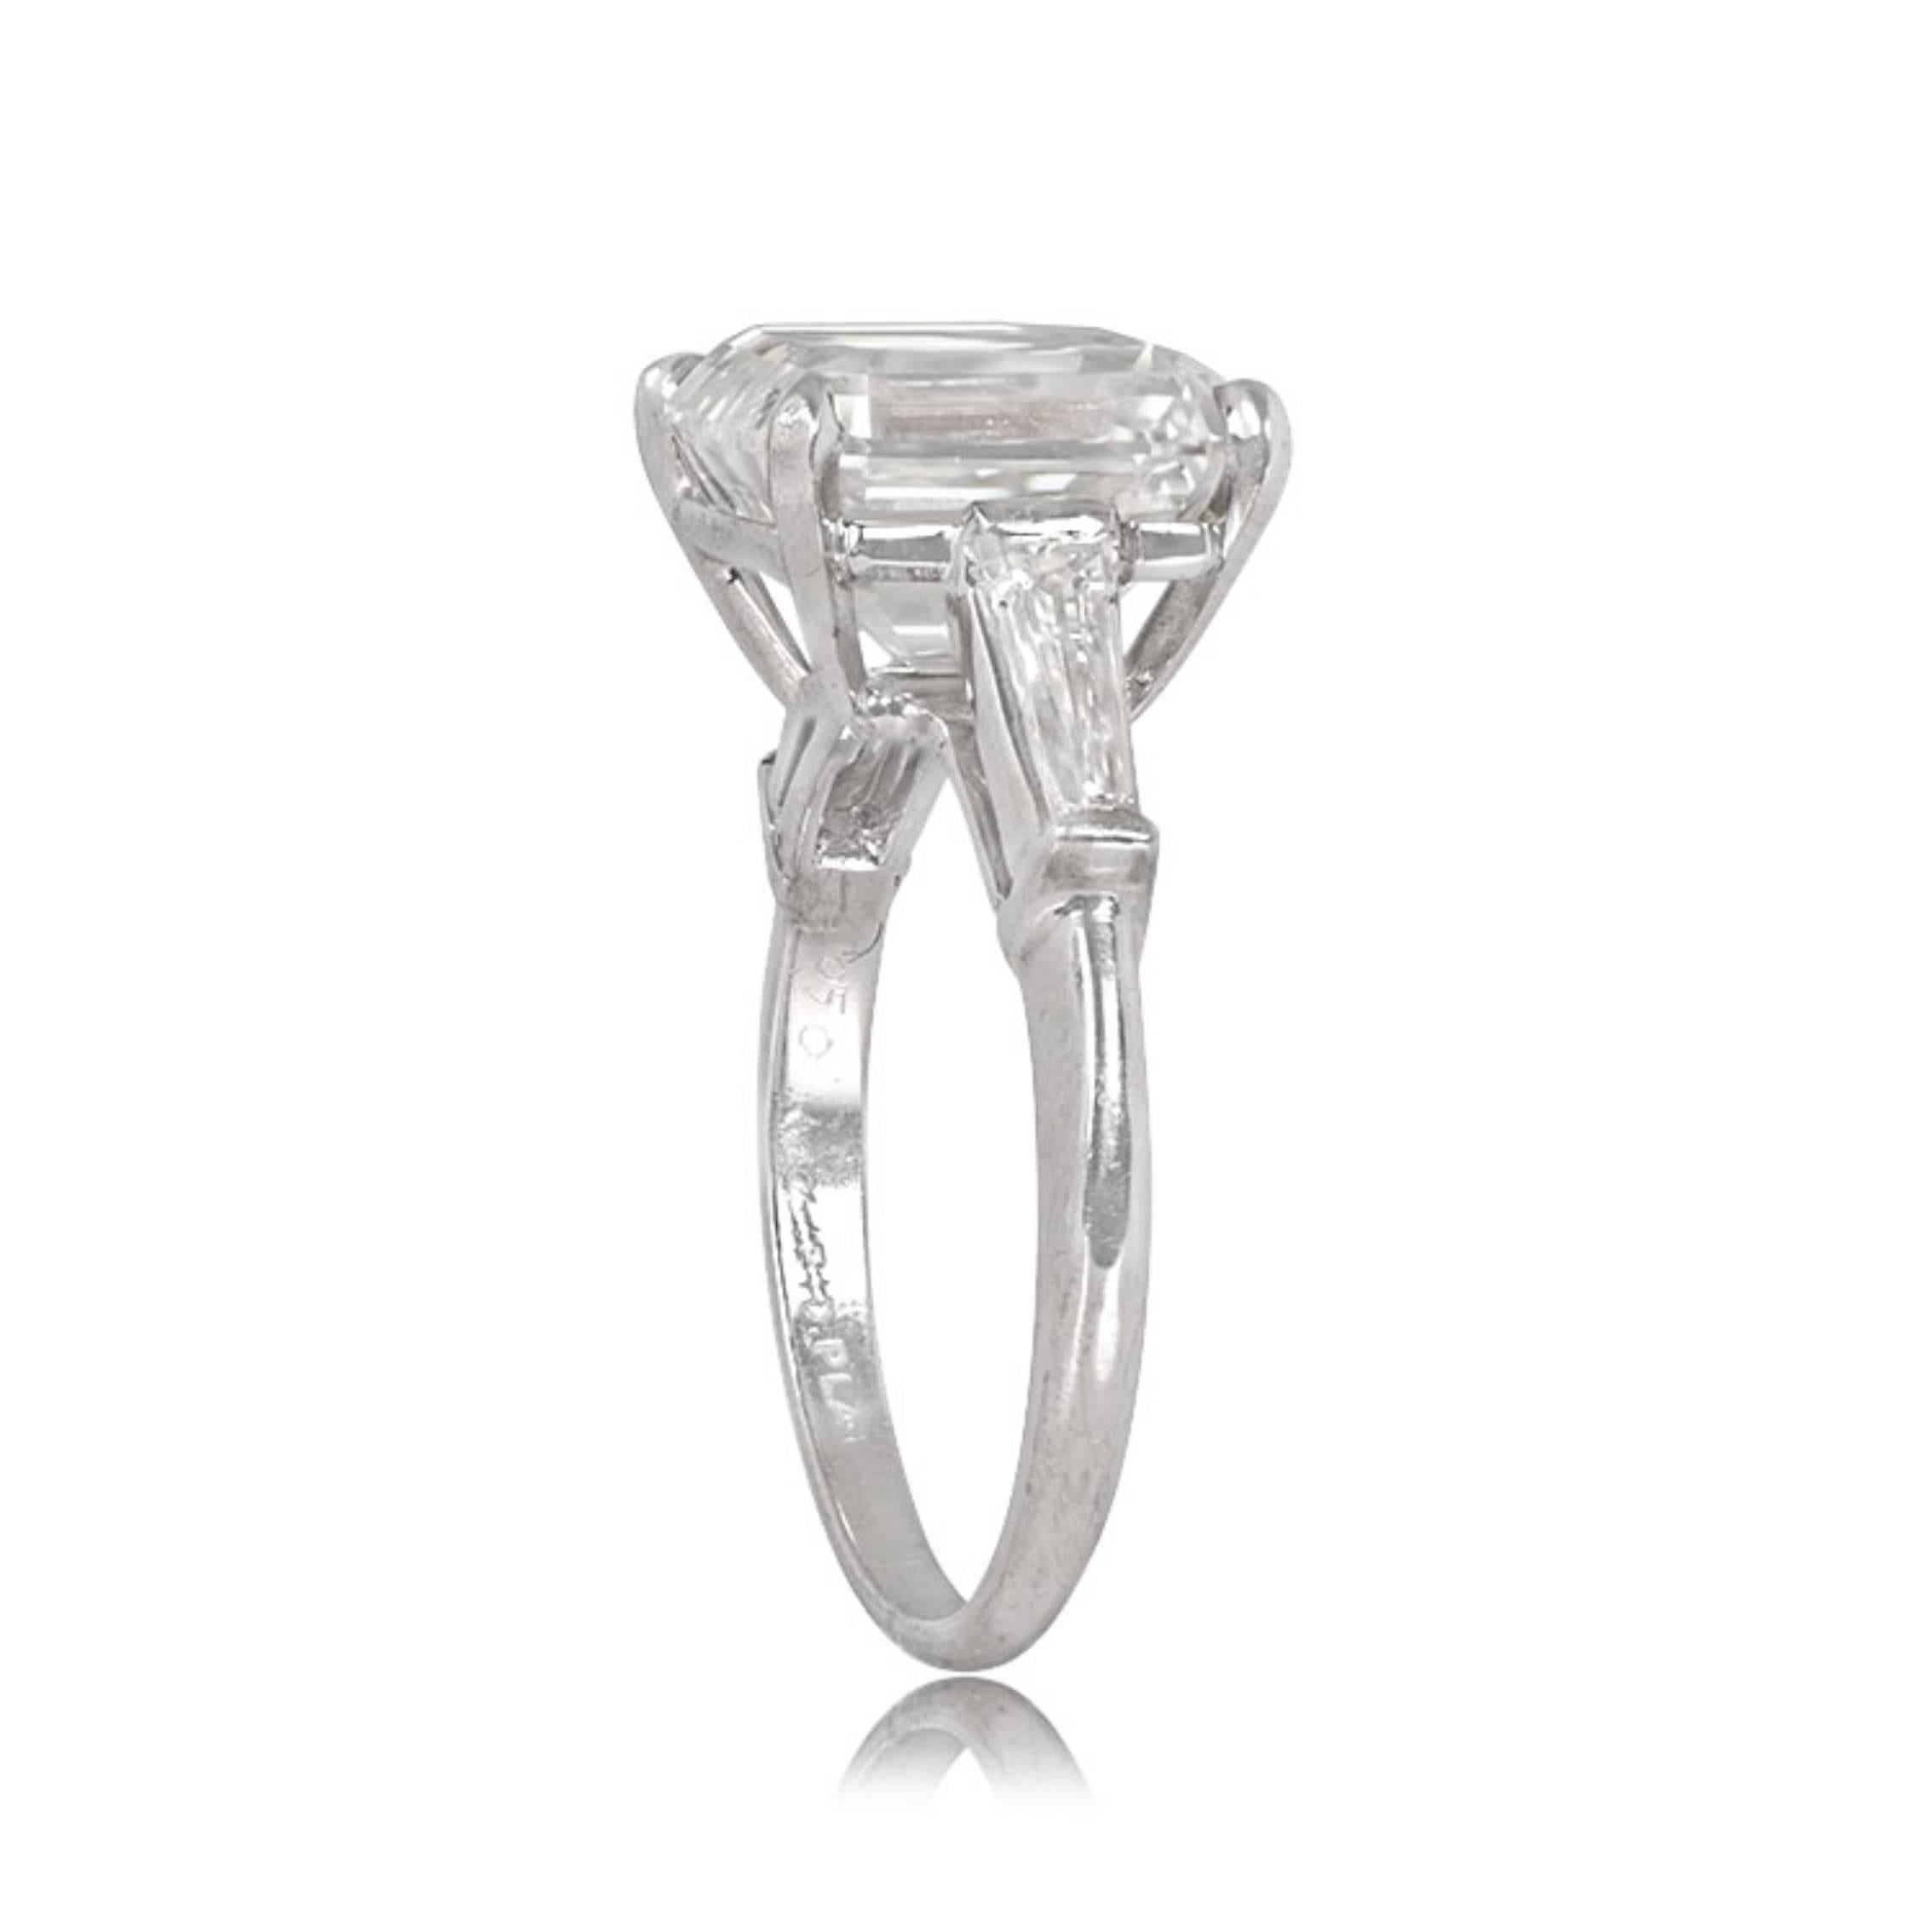 GIA 5.09ct Emerald Cut Diamond Engagement Ring, G Color, VS1 Clarity, Platinum In Excellent Condition For Sale In New York, NY